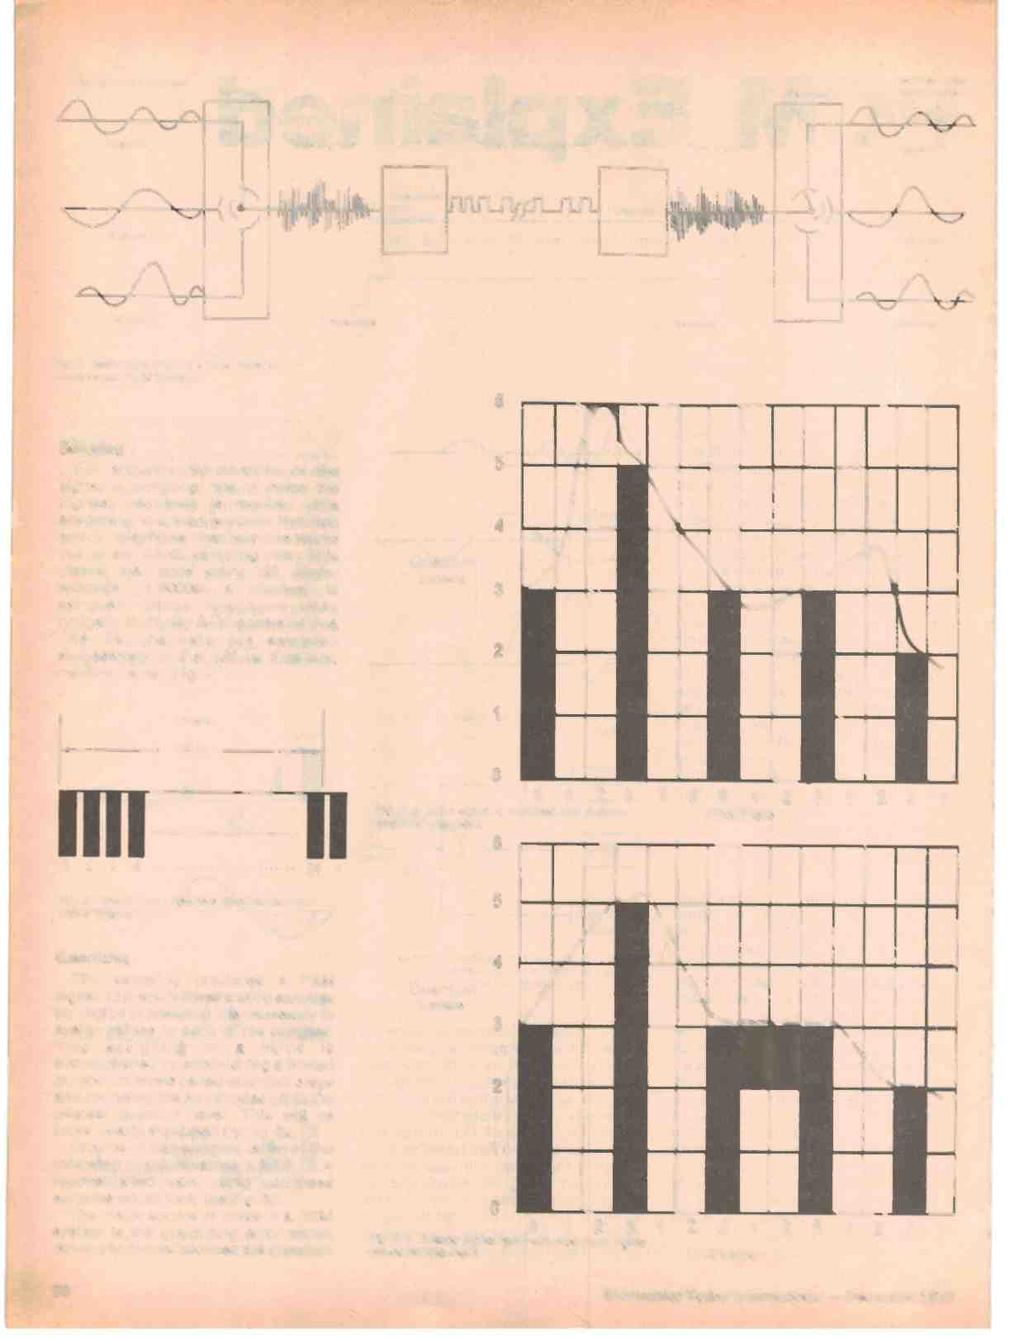 Analog Speech Signals Channel 1 Sampler PAM Signals PCM Line Signals PAM Signals _- Sampler Channel Reconstructed Analog Speech g 1 Channel 2 Ouantizer and Encoder Channel 2 "C::7 Channel 3